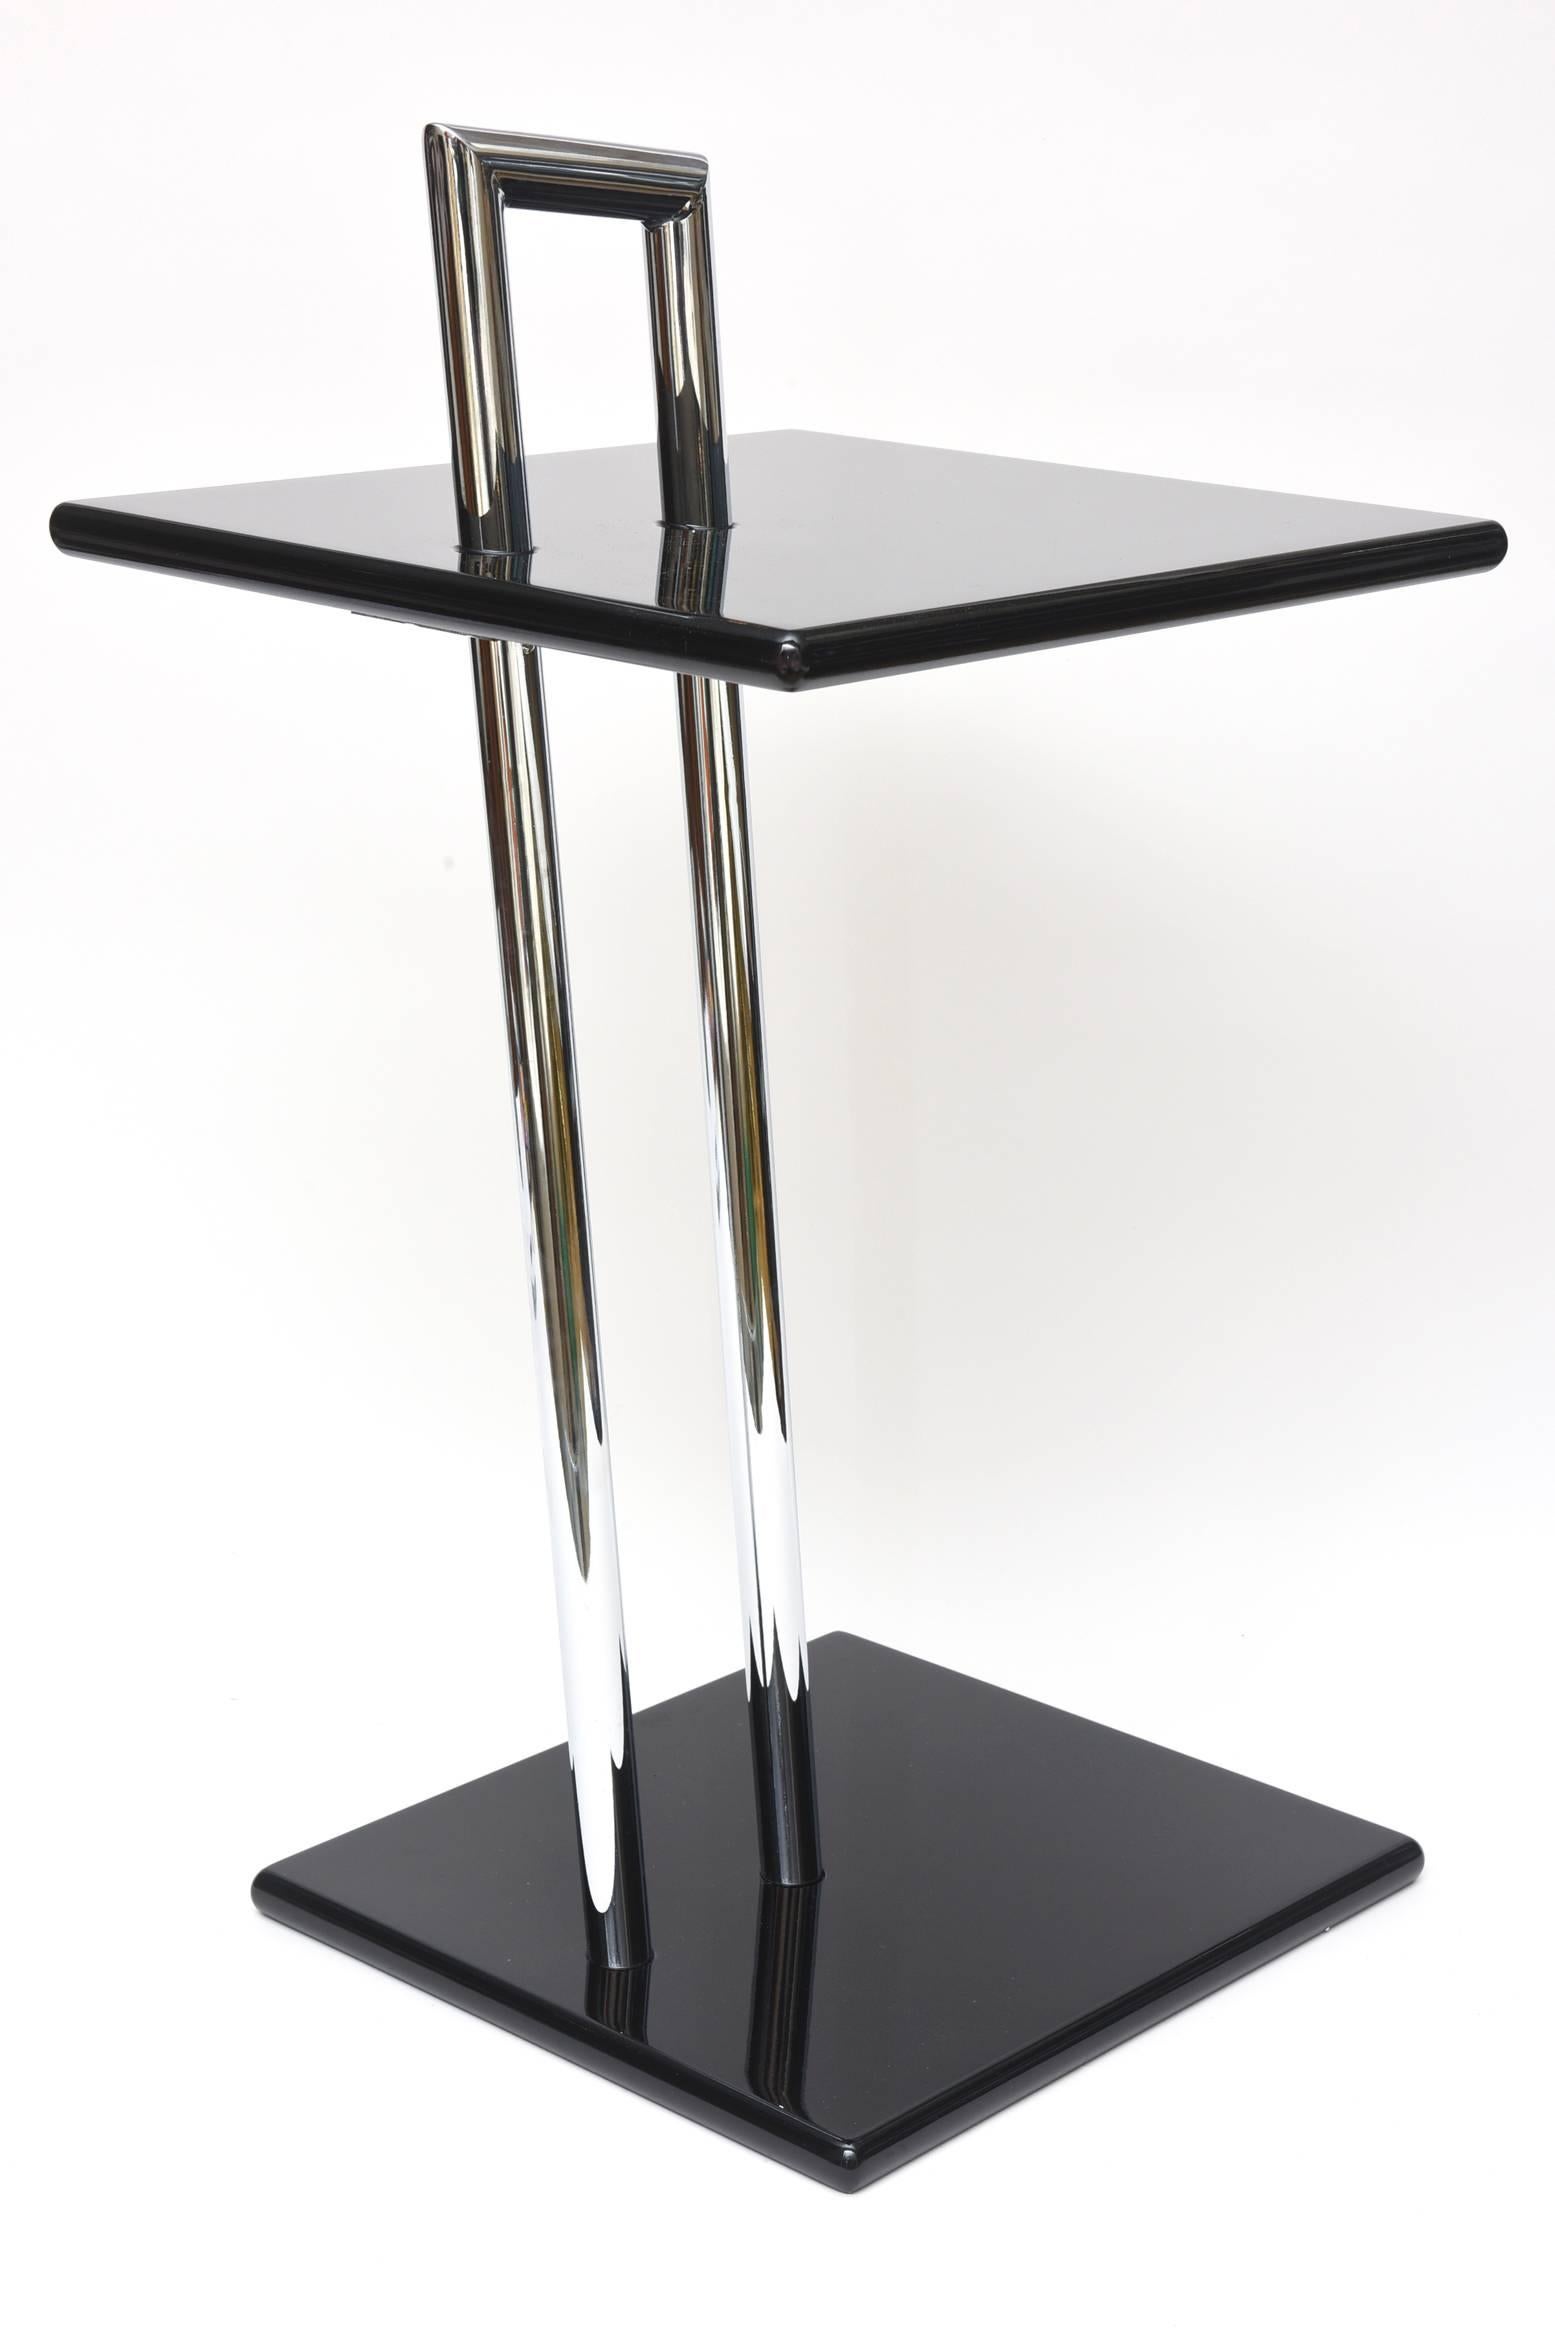 These iconic pair of side or drink tables by the original design of Eileen Gray are the reissues or second edition. They are black lacquered wood and chrome.
Very well made either in Italy or Germany in 2000.

NOTE: THESE WILL BE ON THE SATURDAY